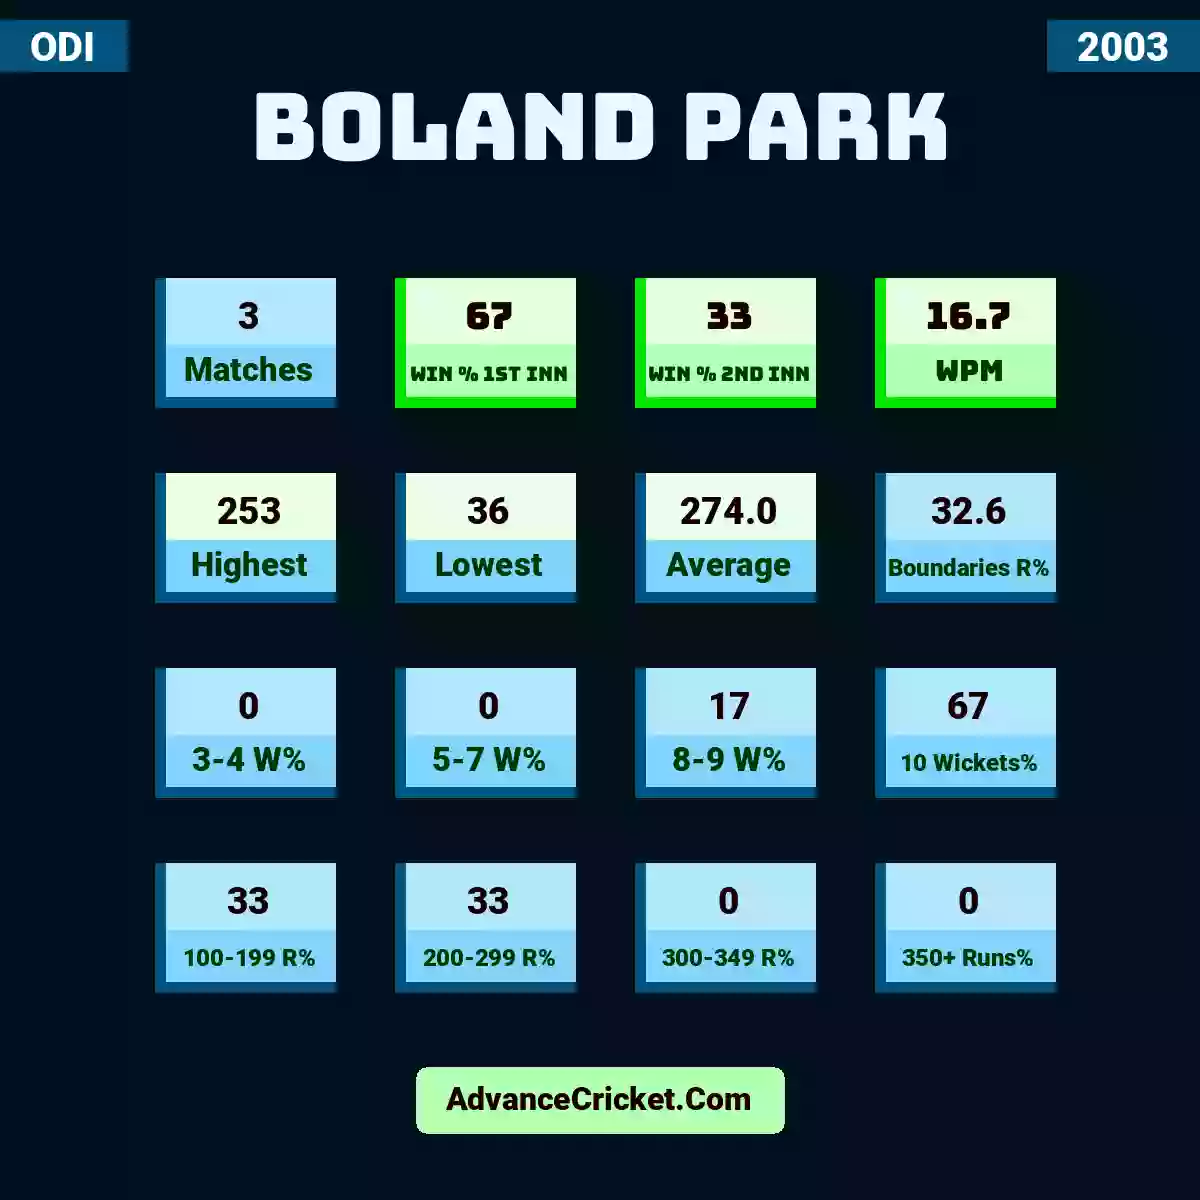 Image showing Boland Park with Matches: 3, Win % 1st Inn: 67, Win % 2nd Inn: 33, WPM: 16.7, Highest: 253, Lowest: 36, Average: 274.0, Boundaries R%: 32.6, 3-4 W%: 0, 5-7 W%: 0, 8-9 W%: 17, 10 Wickets%: 67, 100-199 R%: 33, 200-299 R%: 33, 300-349 R%: 0, 350+ Runs%: 0.